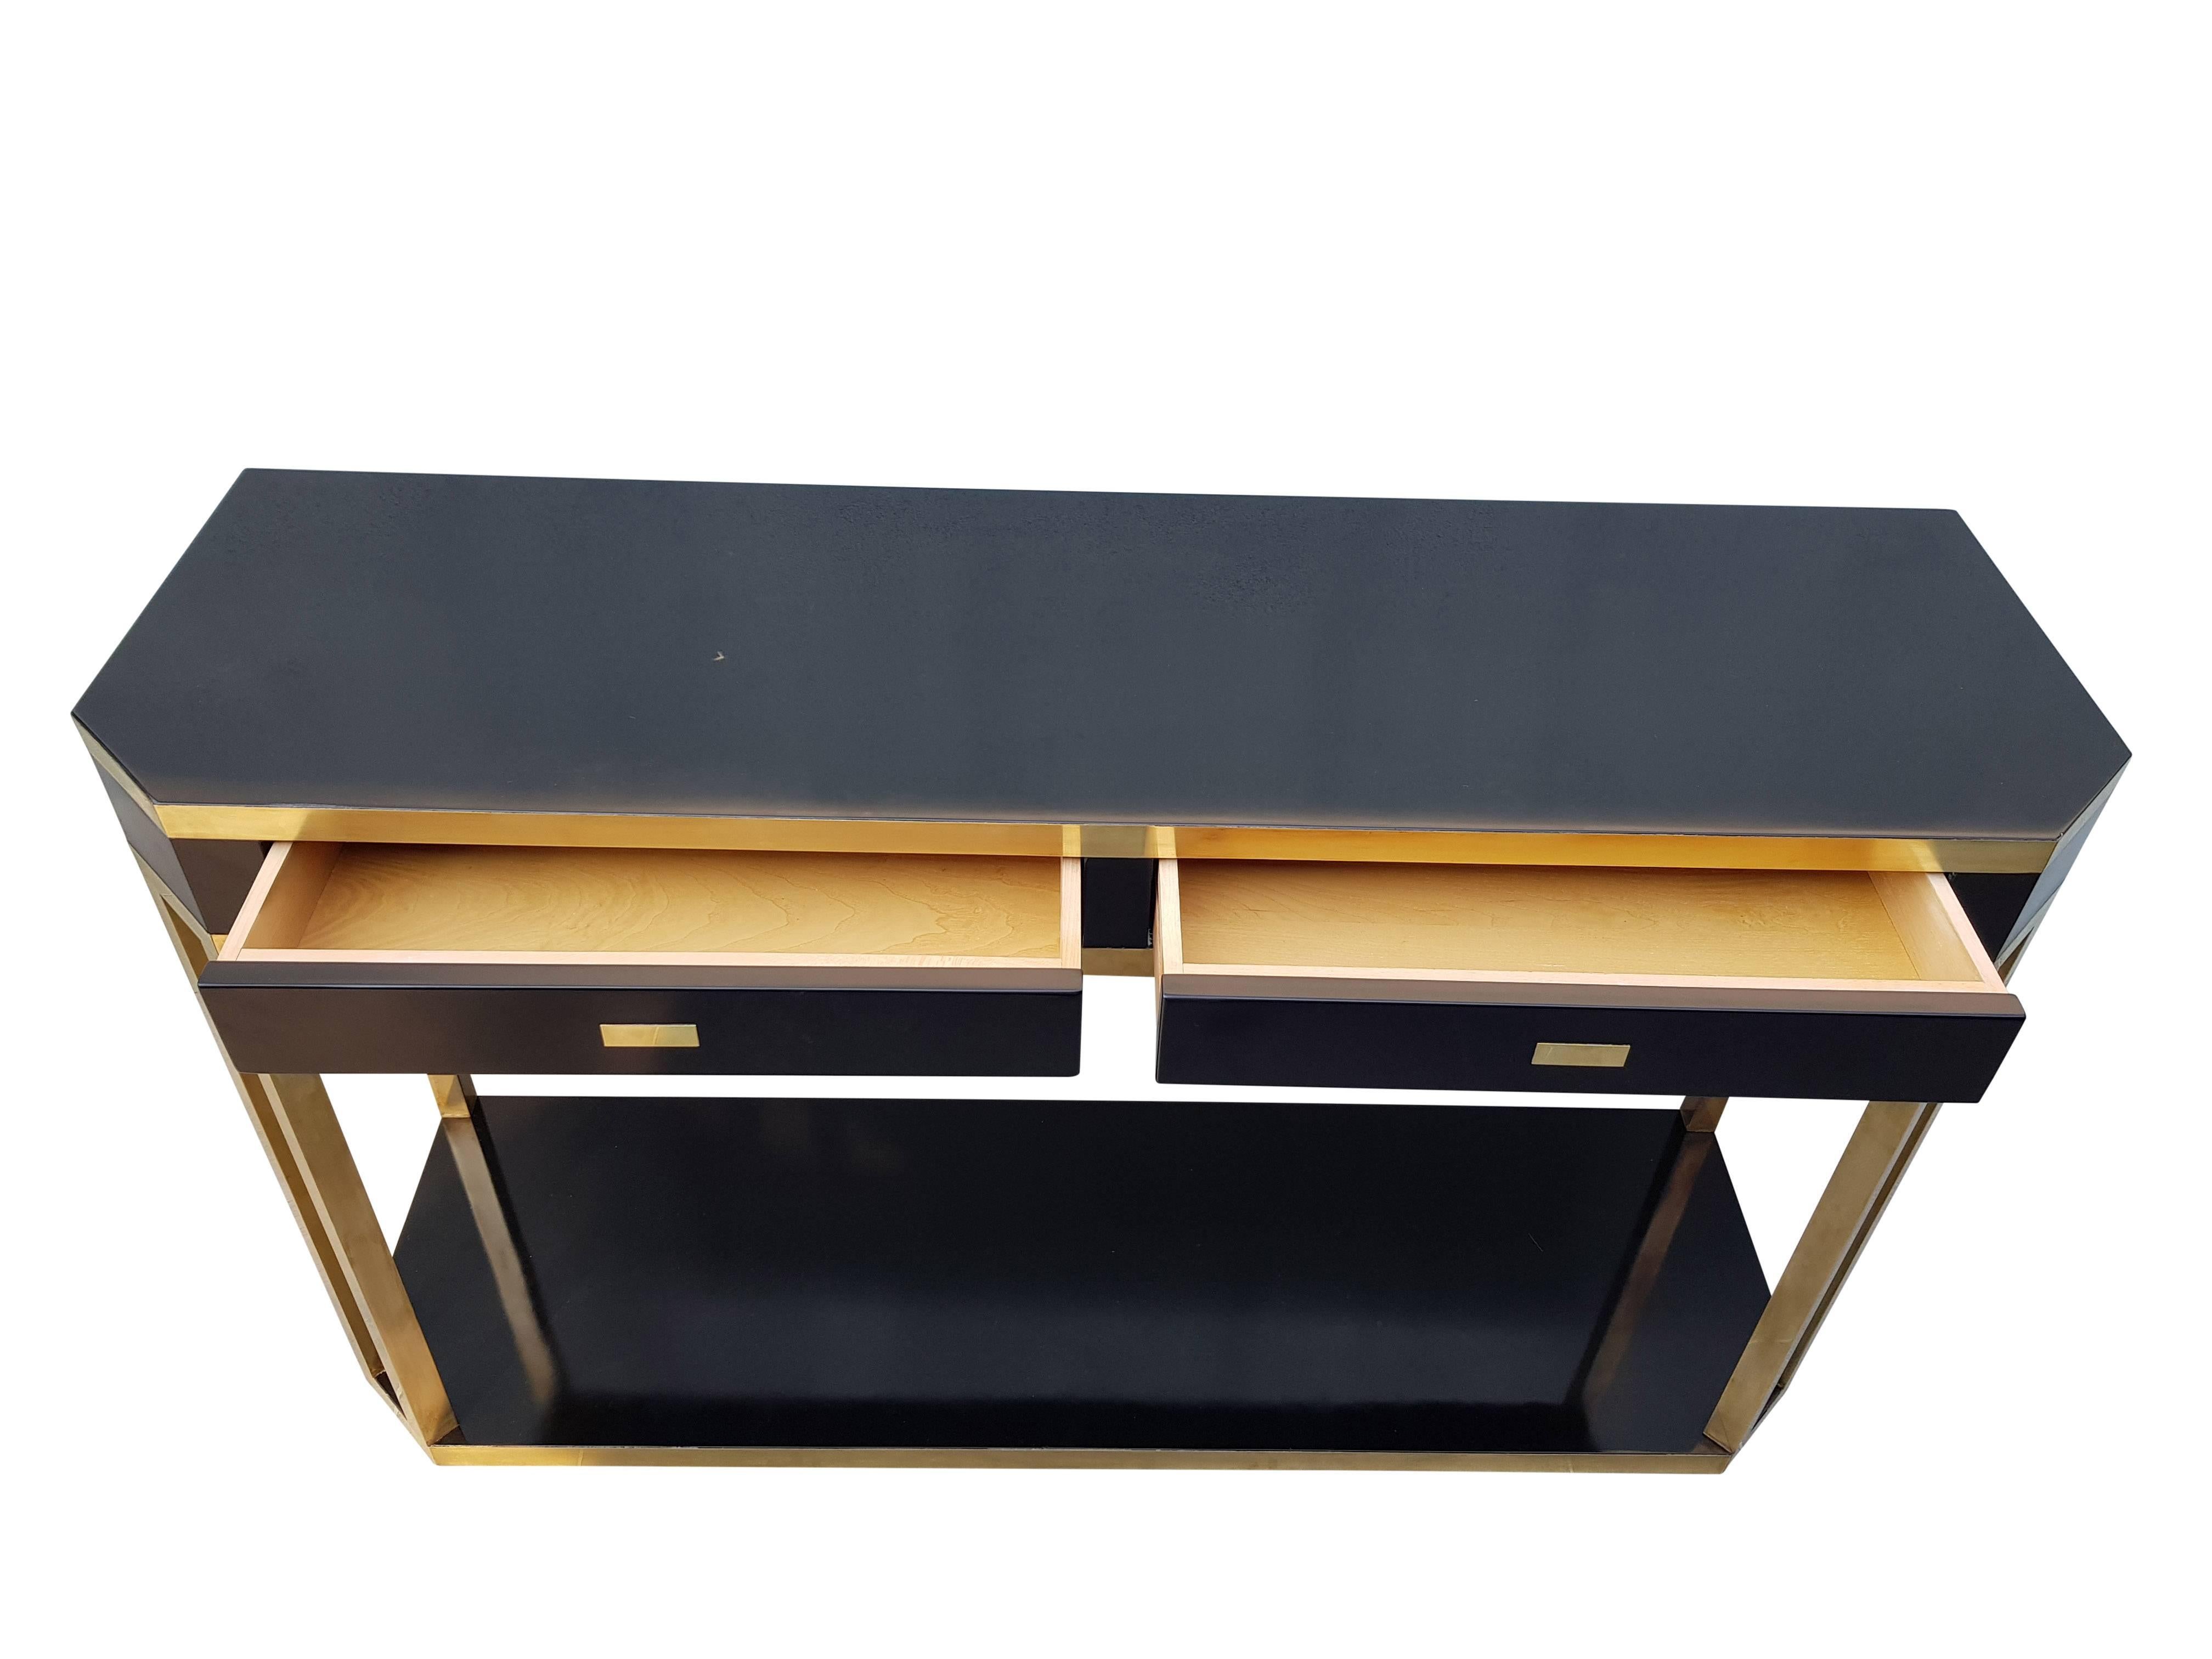 Beautiful large console table in black and brass detailed from Jean Claude mahey,
made in the 1970s in France.
The console table has two drawers that open easily.
General very good condition.
Very good matching in interiors with Willy Rizzo,